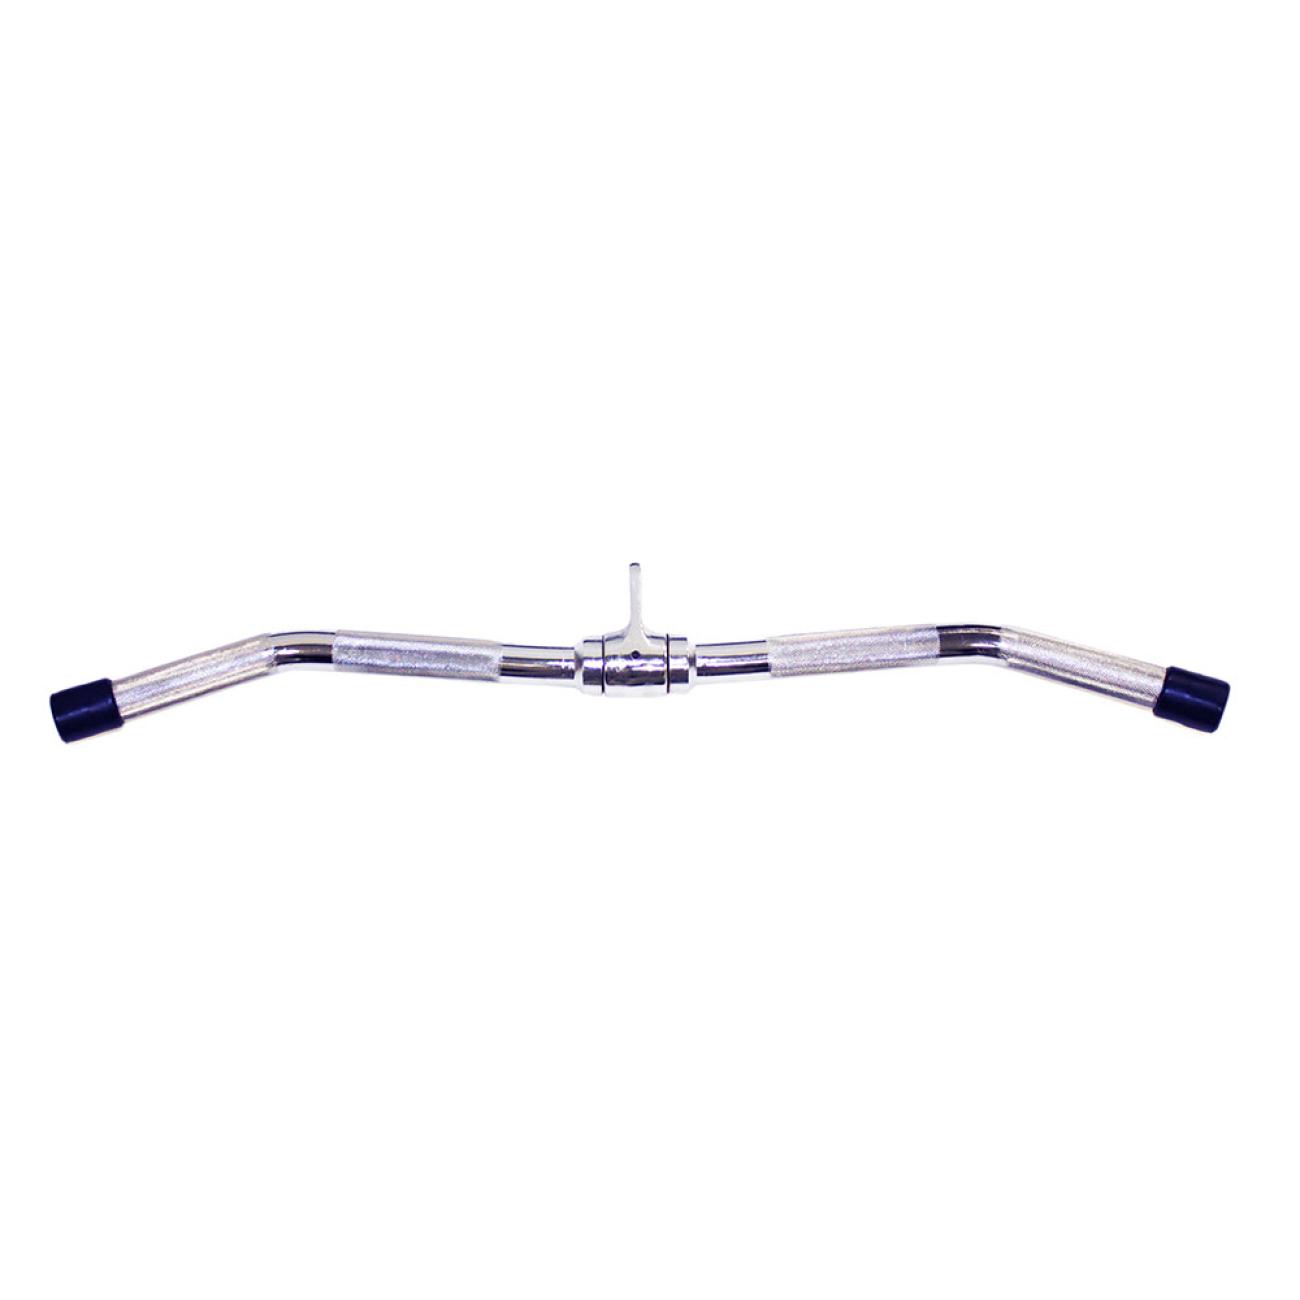 Troy 28-inch Multi-Purposed Deluxe Curl Bar